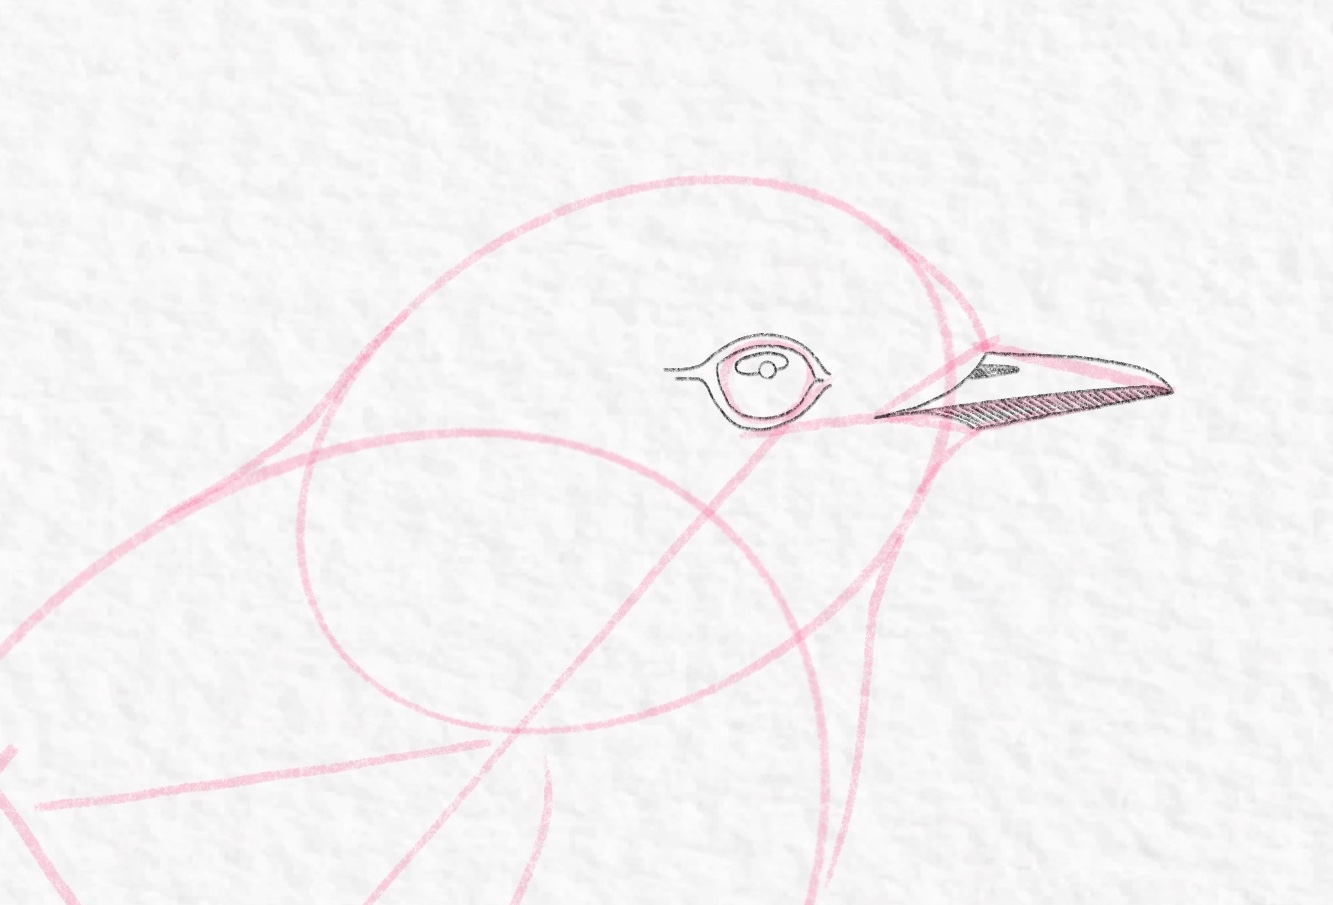 How to draw a bird – Step 8b cropped